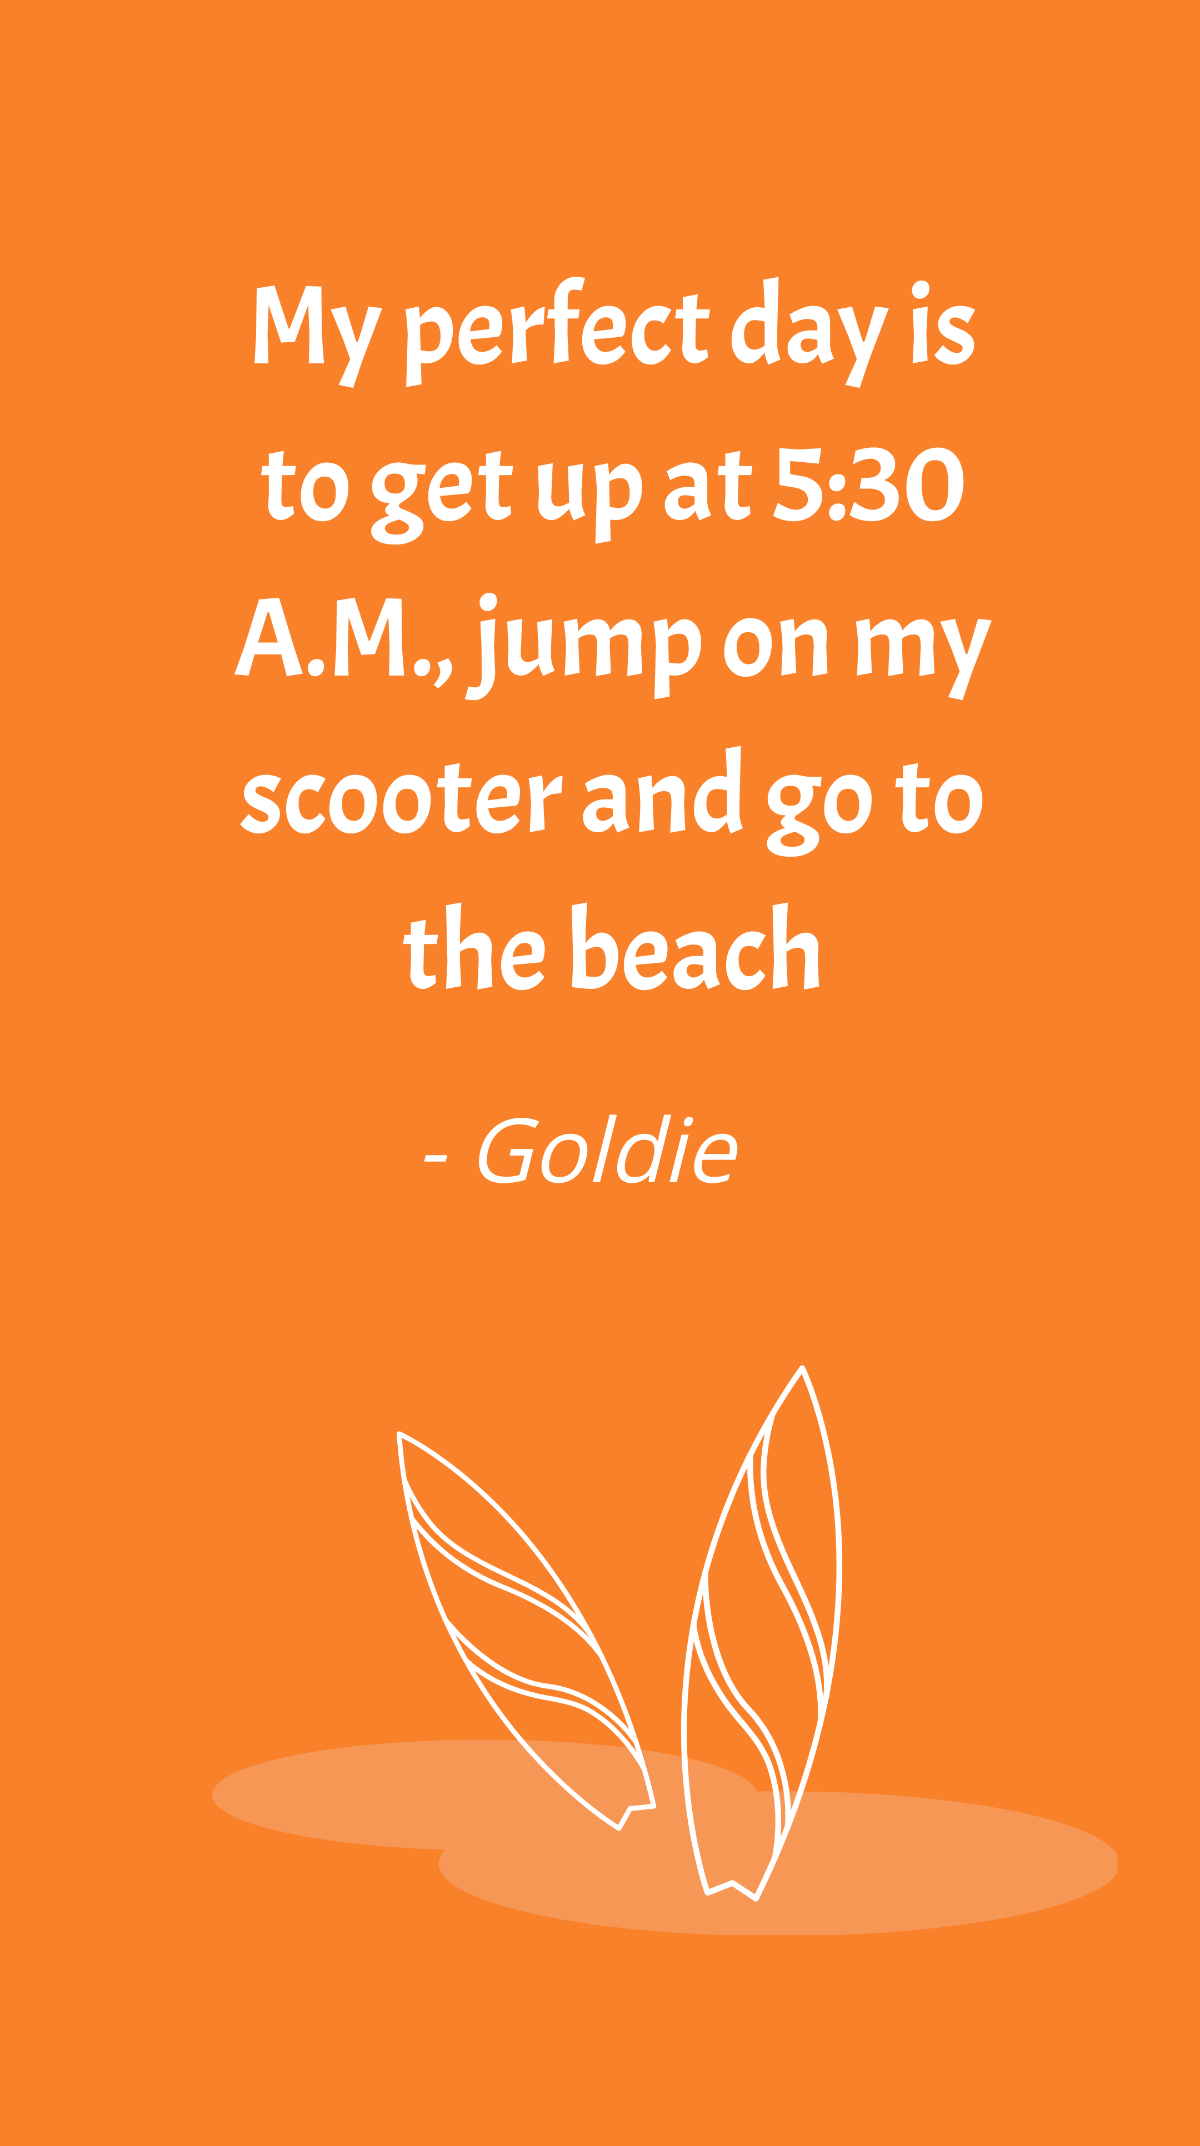 Goldie - My perfect day is to get up at 5:30 A.M., jump on my scooter and go to the beach